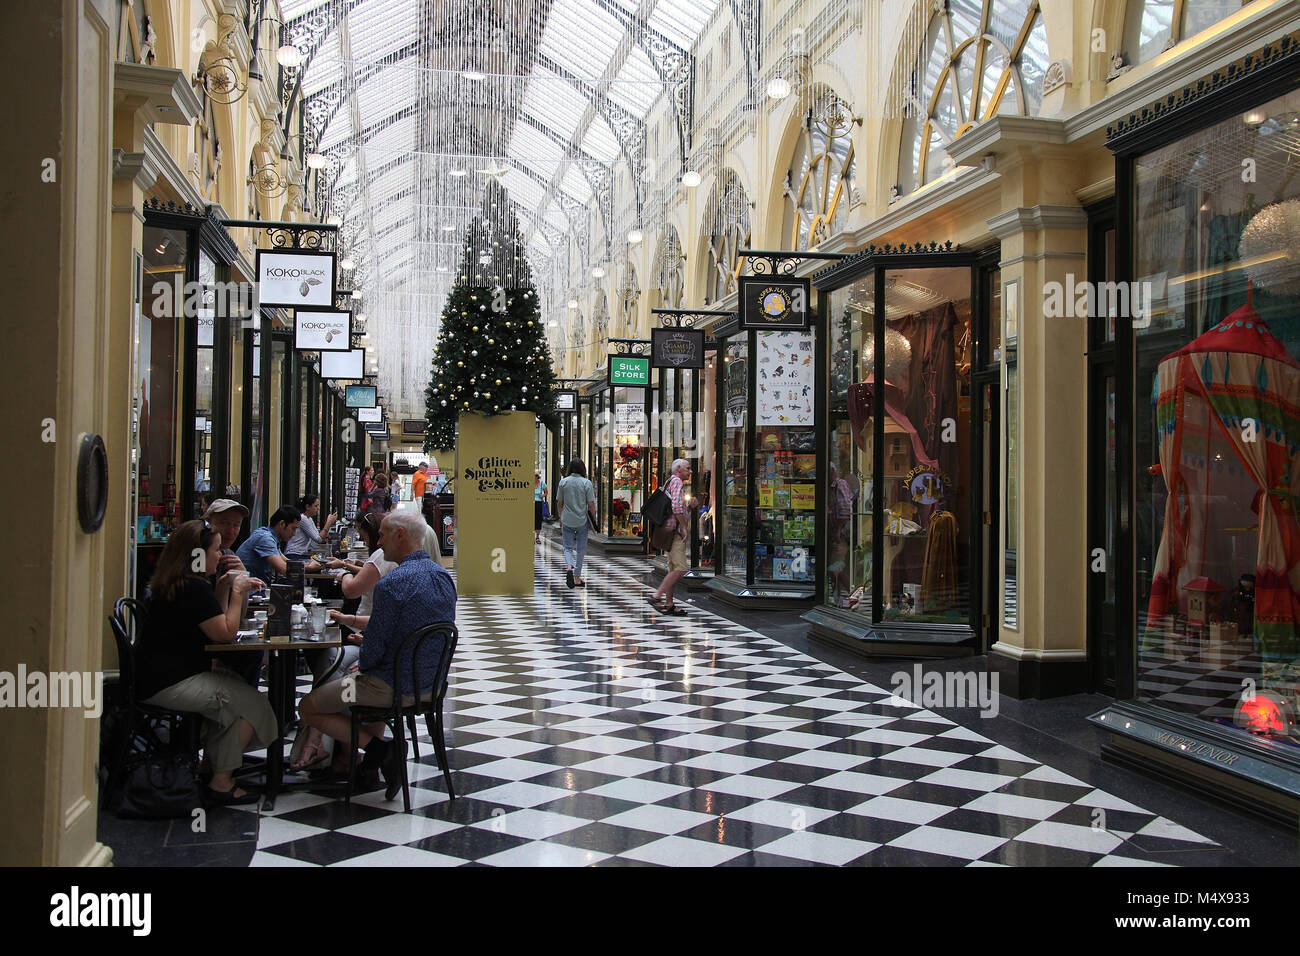 Royal Arcade with its black and white chequered floor in Melbourne Stock Photo